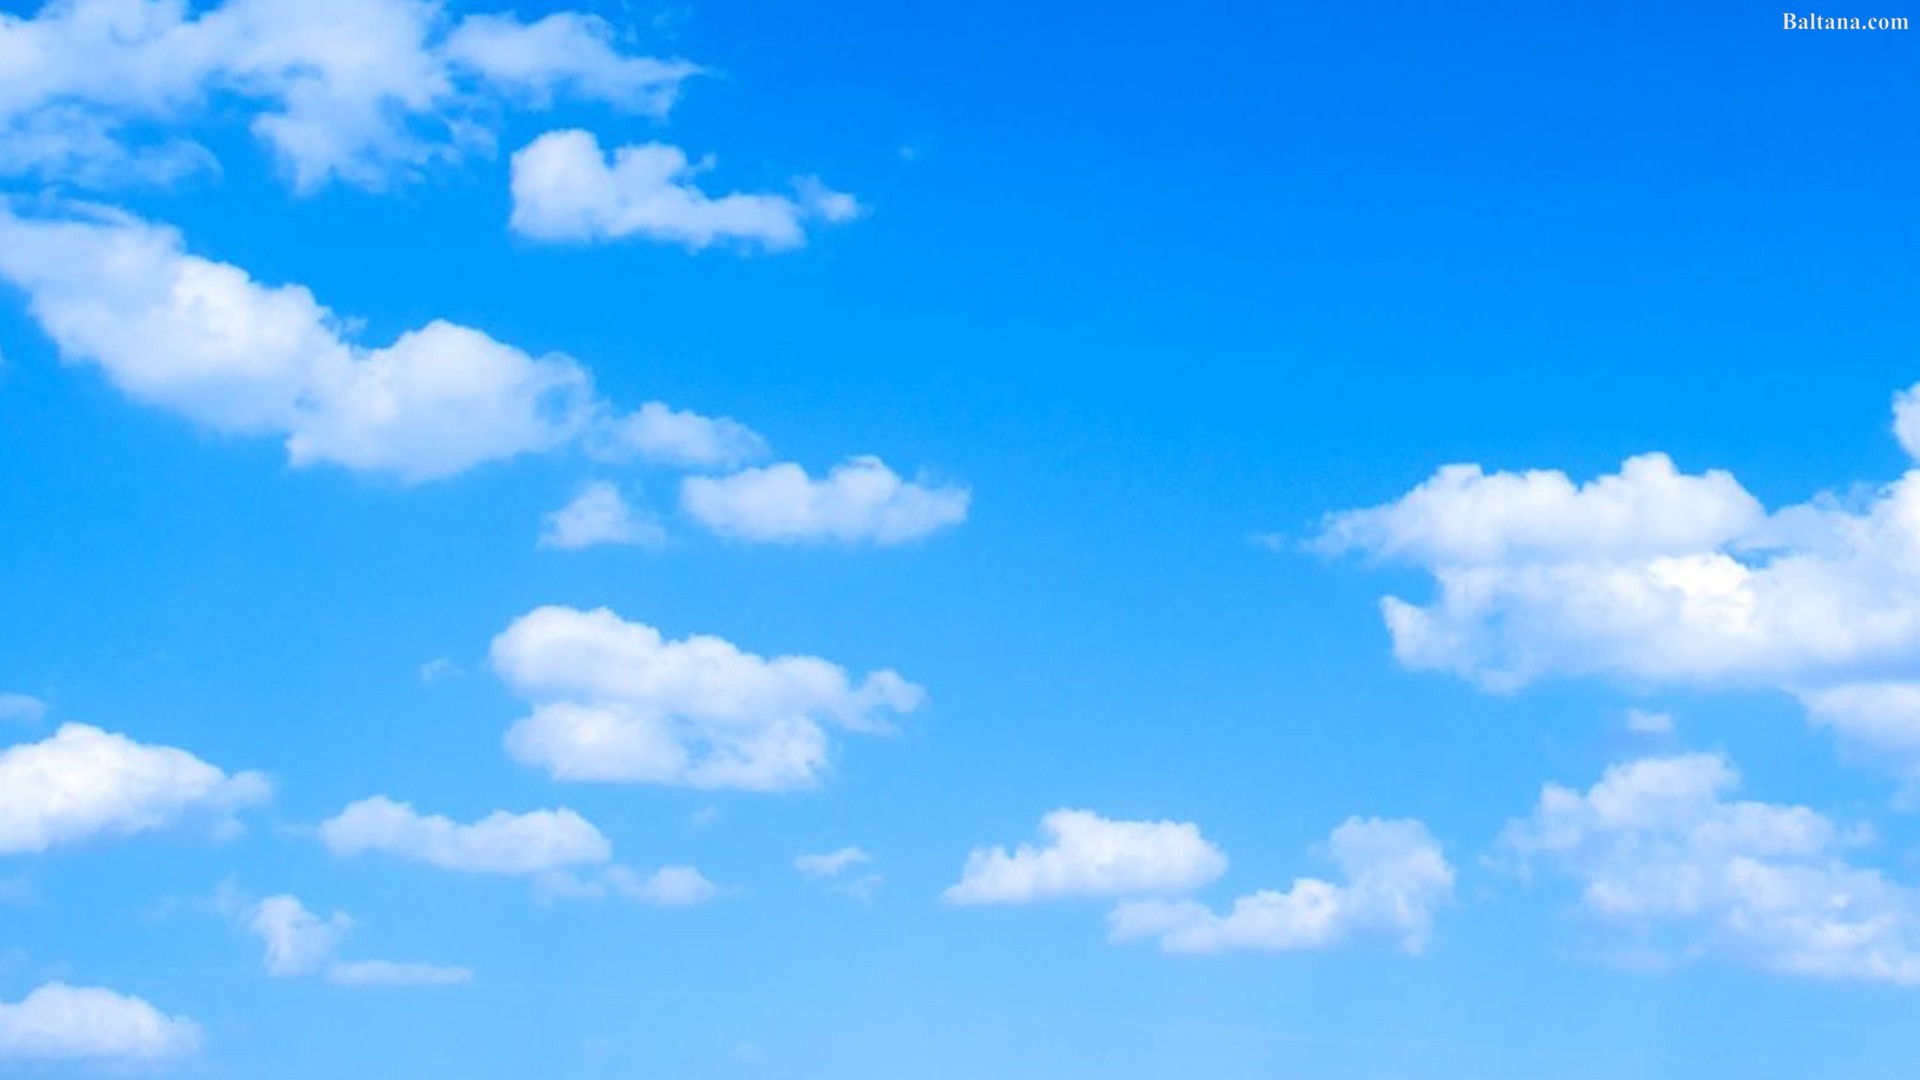 Download Clouds Wallpaper Hd - Blue Sky With Few Clouds On Itl.cat